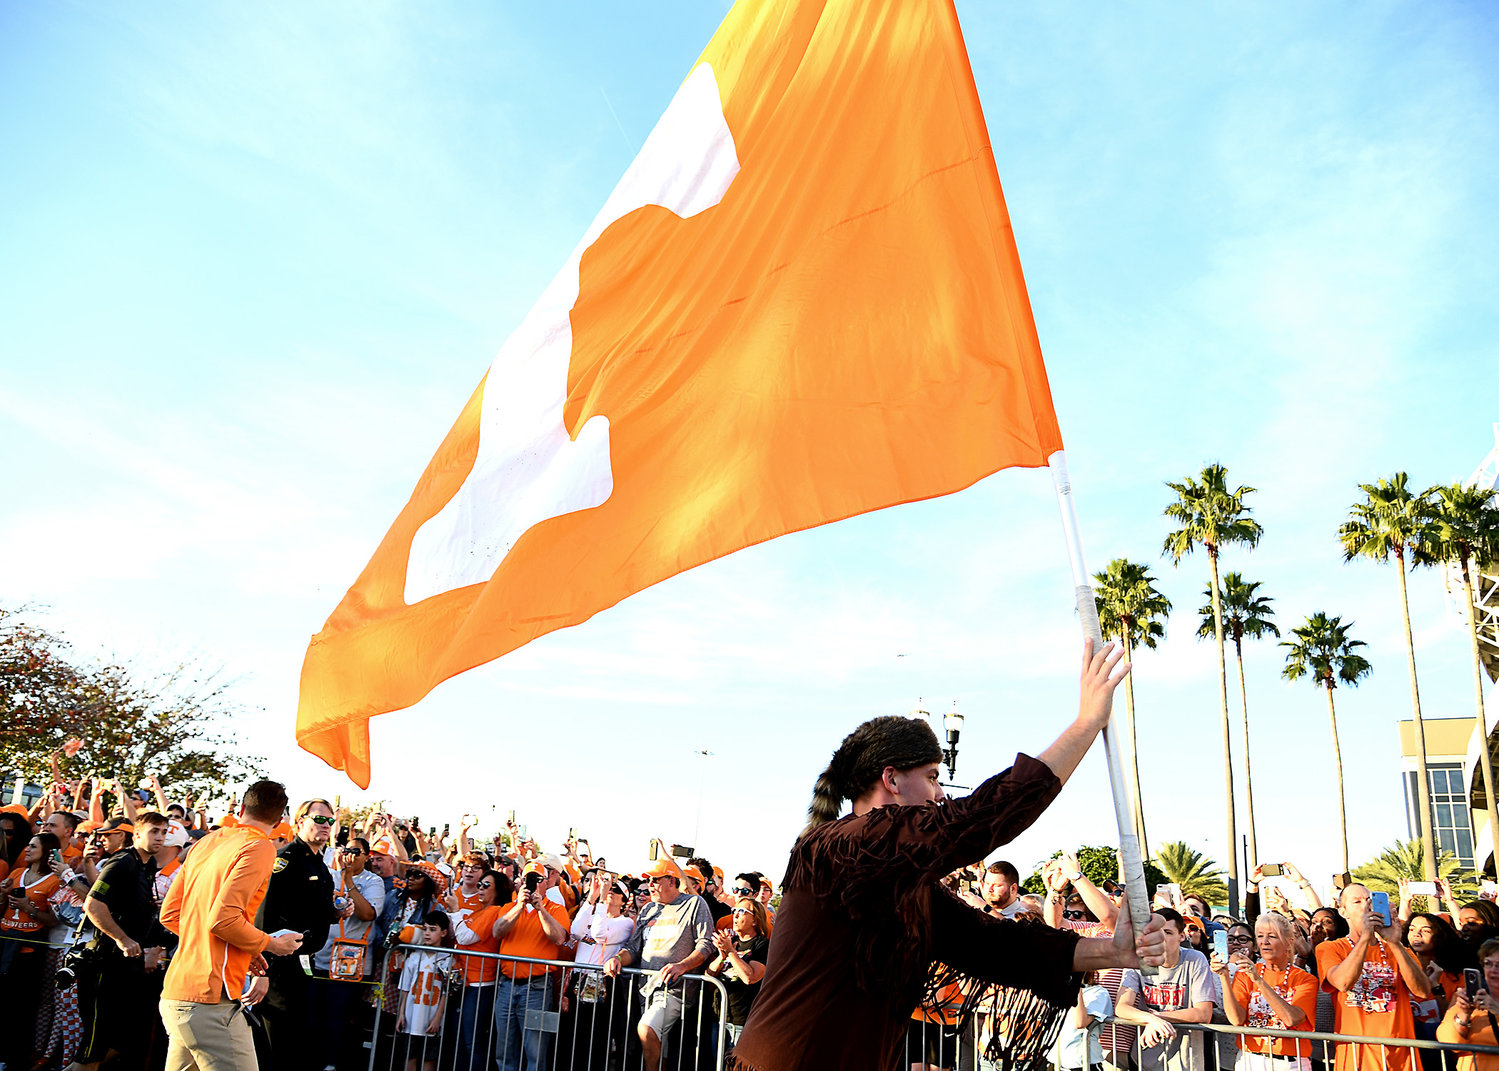 Tennessee Volunteers fans greet players and coaches as they arrive at TIAA Bank Field for the Gator Bowl NCAA football game against the Indiana Hoosiers Thursday, Jan. 2, 2020.